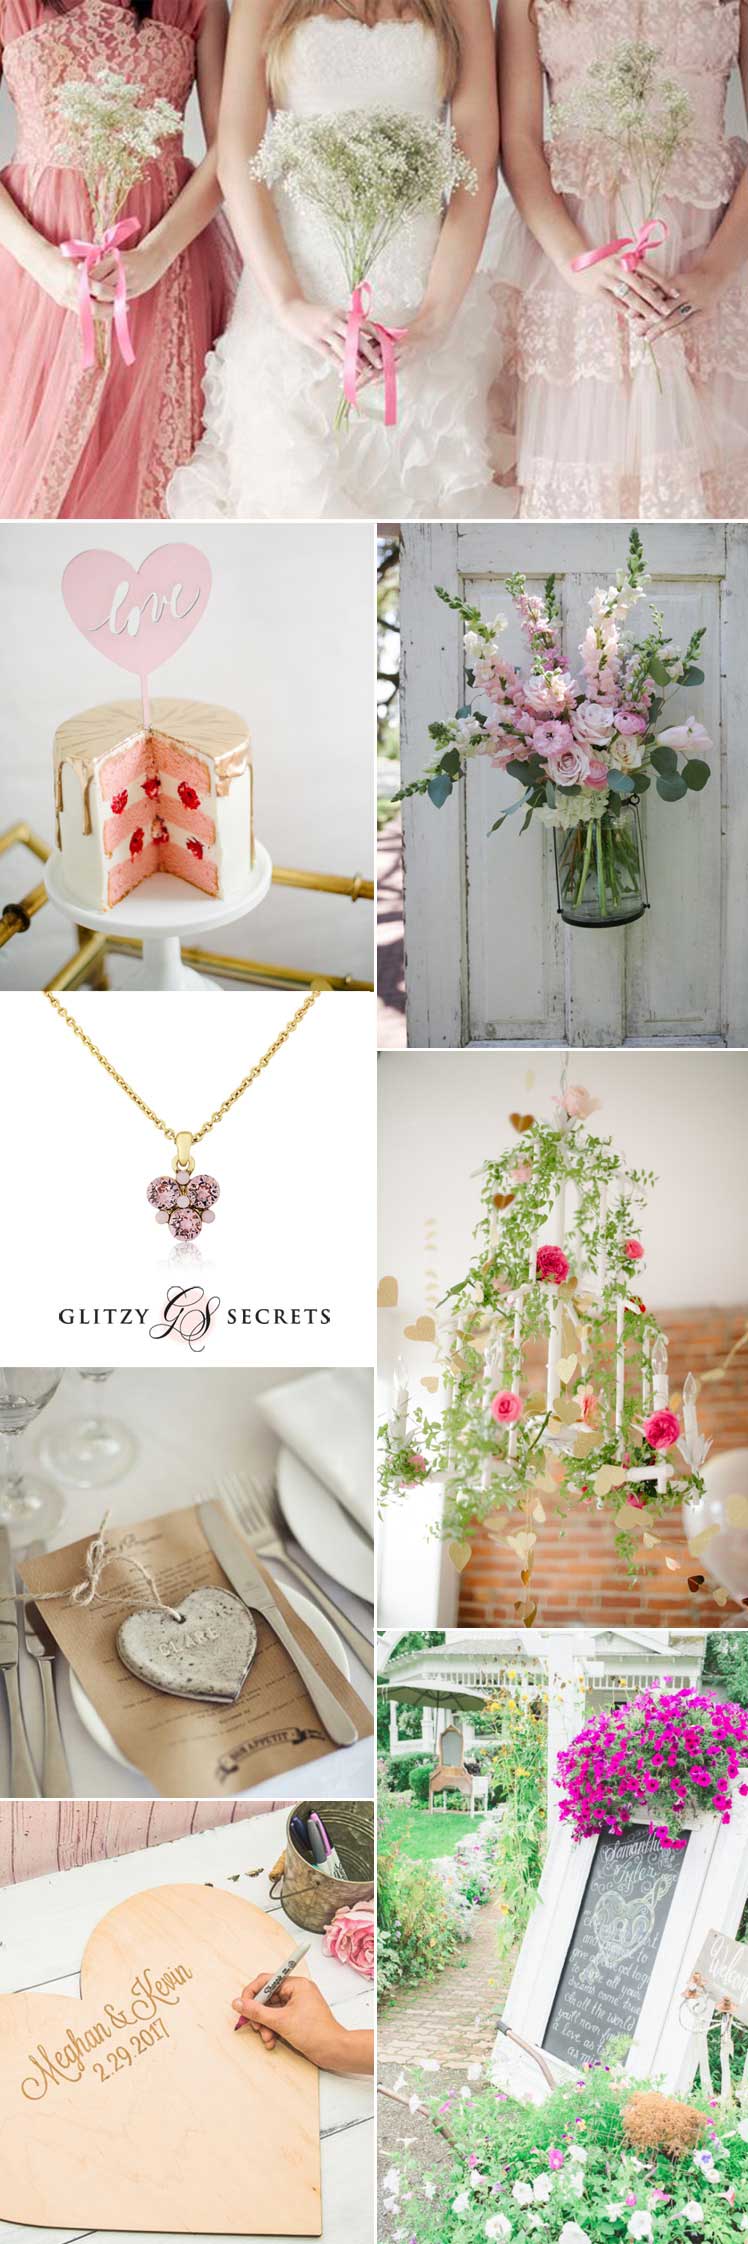 Ideas for a Valentine wedding day with a shabby chic style